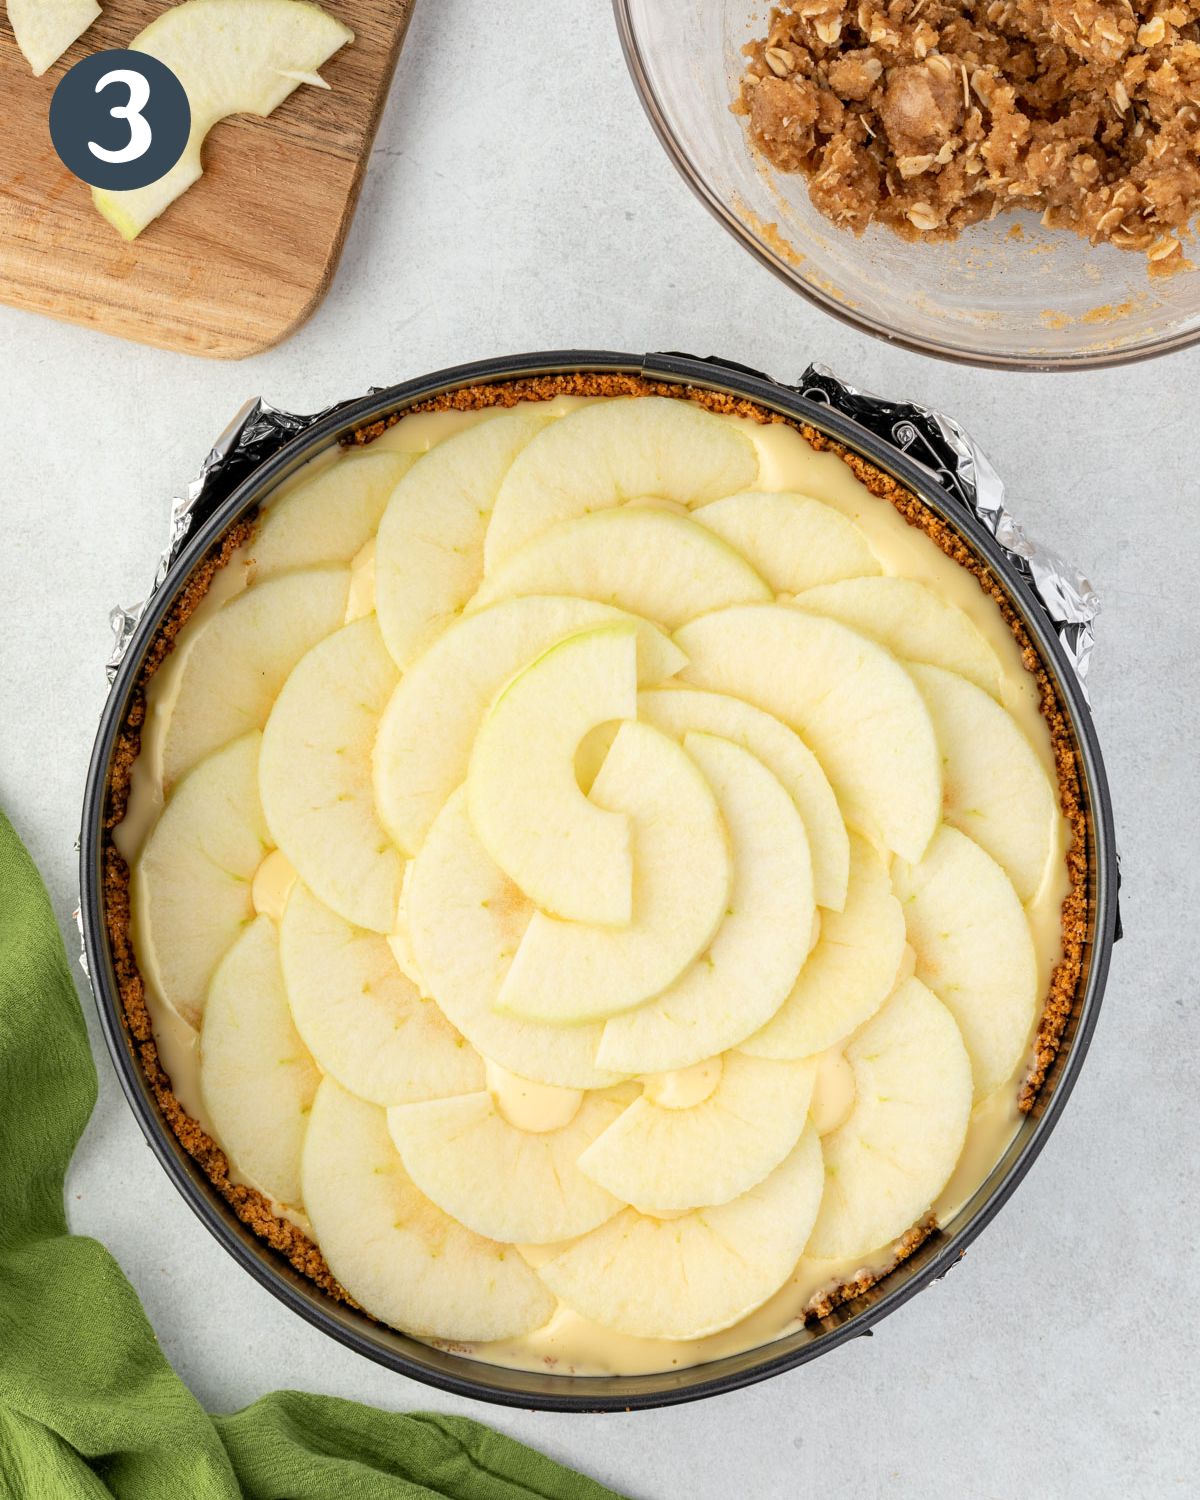 Apple slices are arranged in a circular pattern on top of the cheesecake batter.